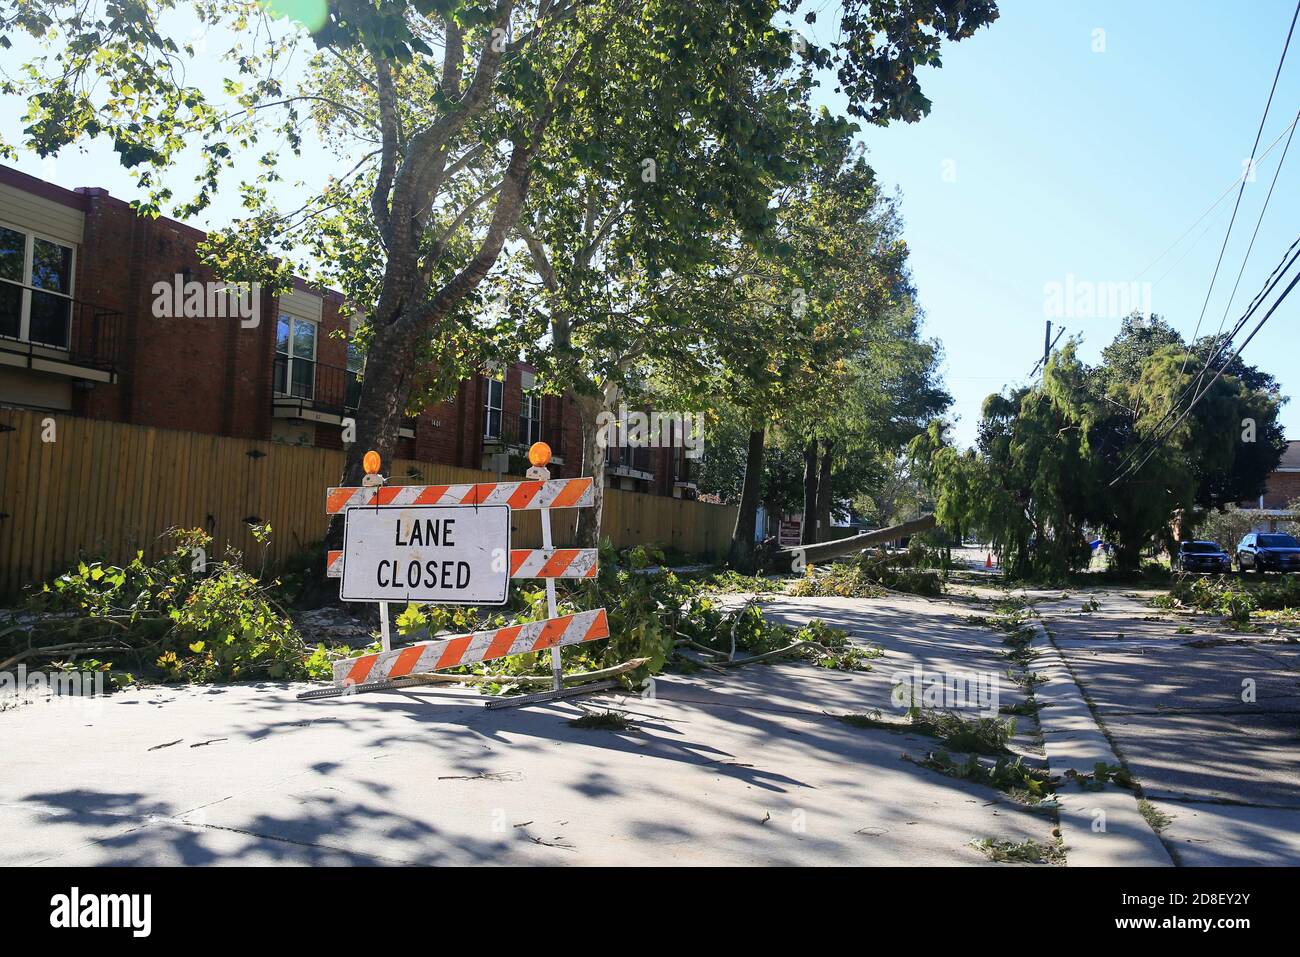 New Orleans. 29th Oct, 2020. Photo taken on Oct. 29, 2020 shows a closed lane due to fallen trees in New Orleans, Louisiana, the United States. Over half a million people were without power in the U.S. state of Louisiana after Category 2 Hurricane Zeta made landfall Wednesday afternoon along the Gulf Coast, authorities said Thursday. According to the National Hurricane Center, Zeta has downgraded to a tropical storm. At least three deaths have been blamed on the storm in Louisiana, Mississippi and Georgia. Credit: Lan Wei/Xinhua/Alamy Live News Stock Photo